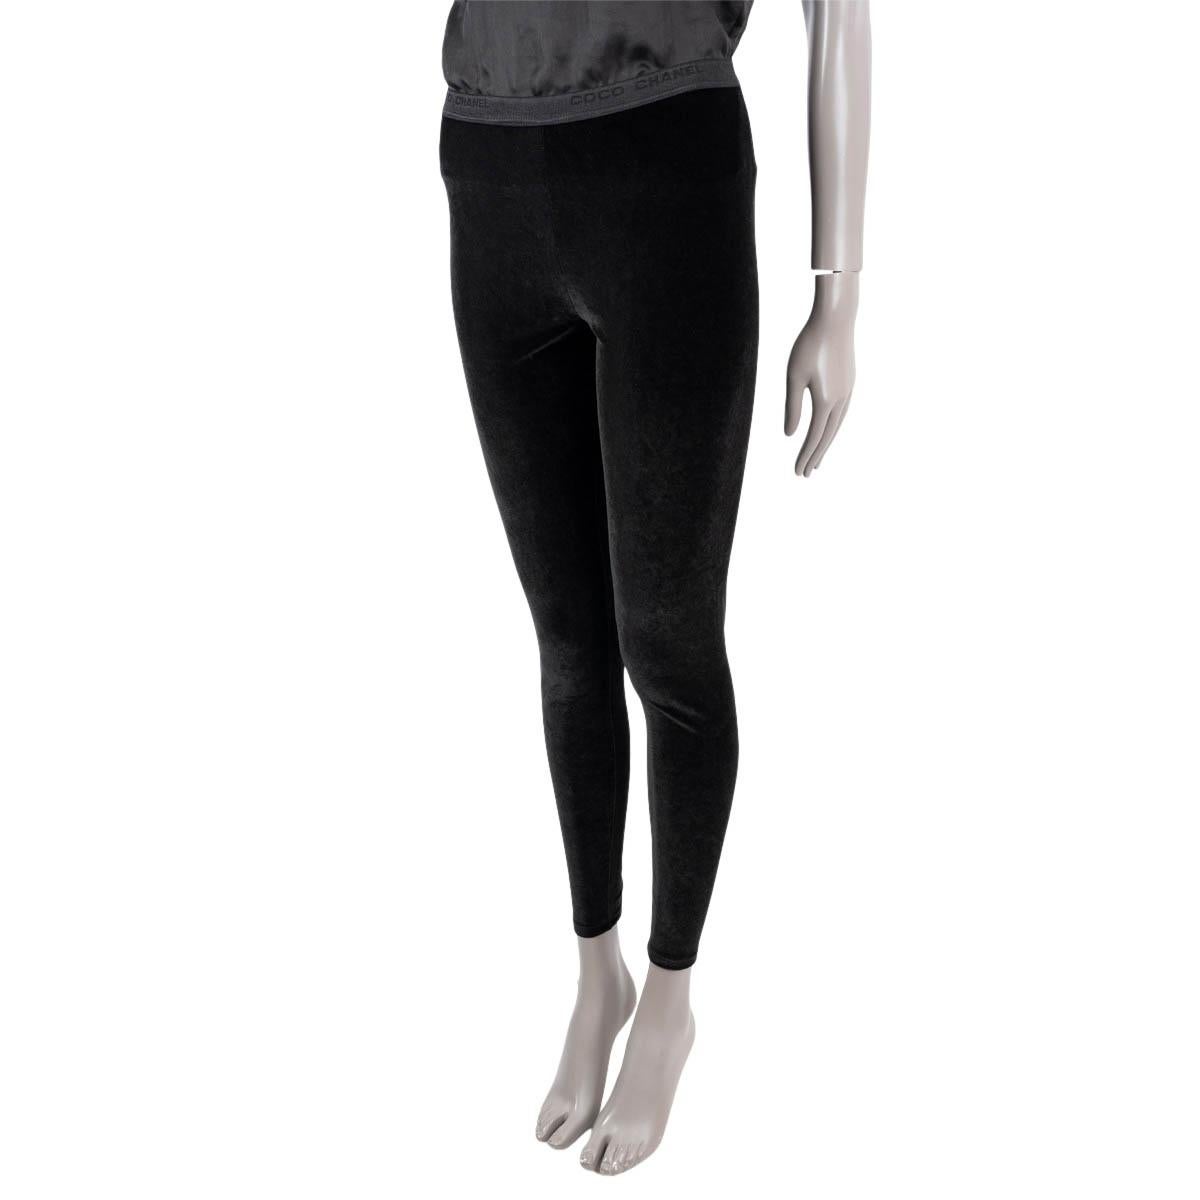 100% authentic Chanel leggings in black velvet (100%) (missing tag) with a logo waist-band. Features CC logo with black rhinestones on the front. Unlined. Have been worn and are in excellent condition.

2015 Paris-Salzburg Metiers